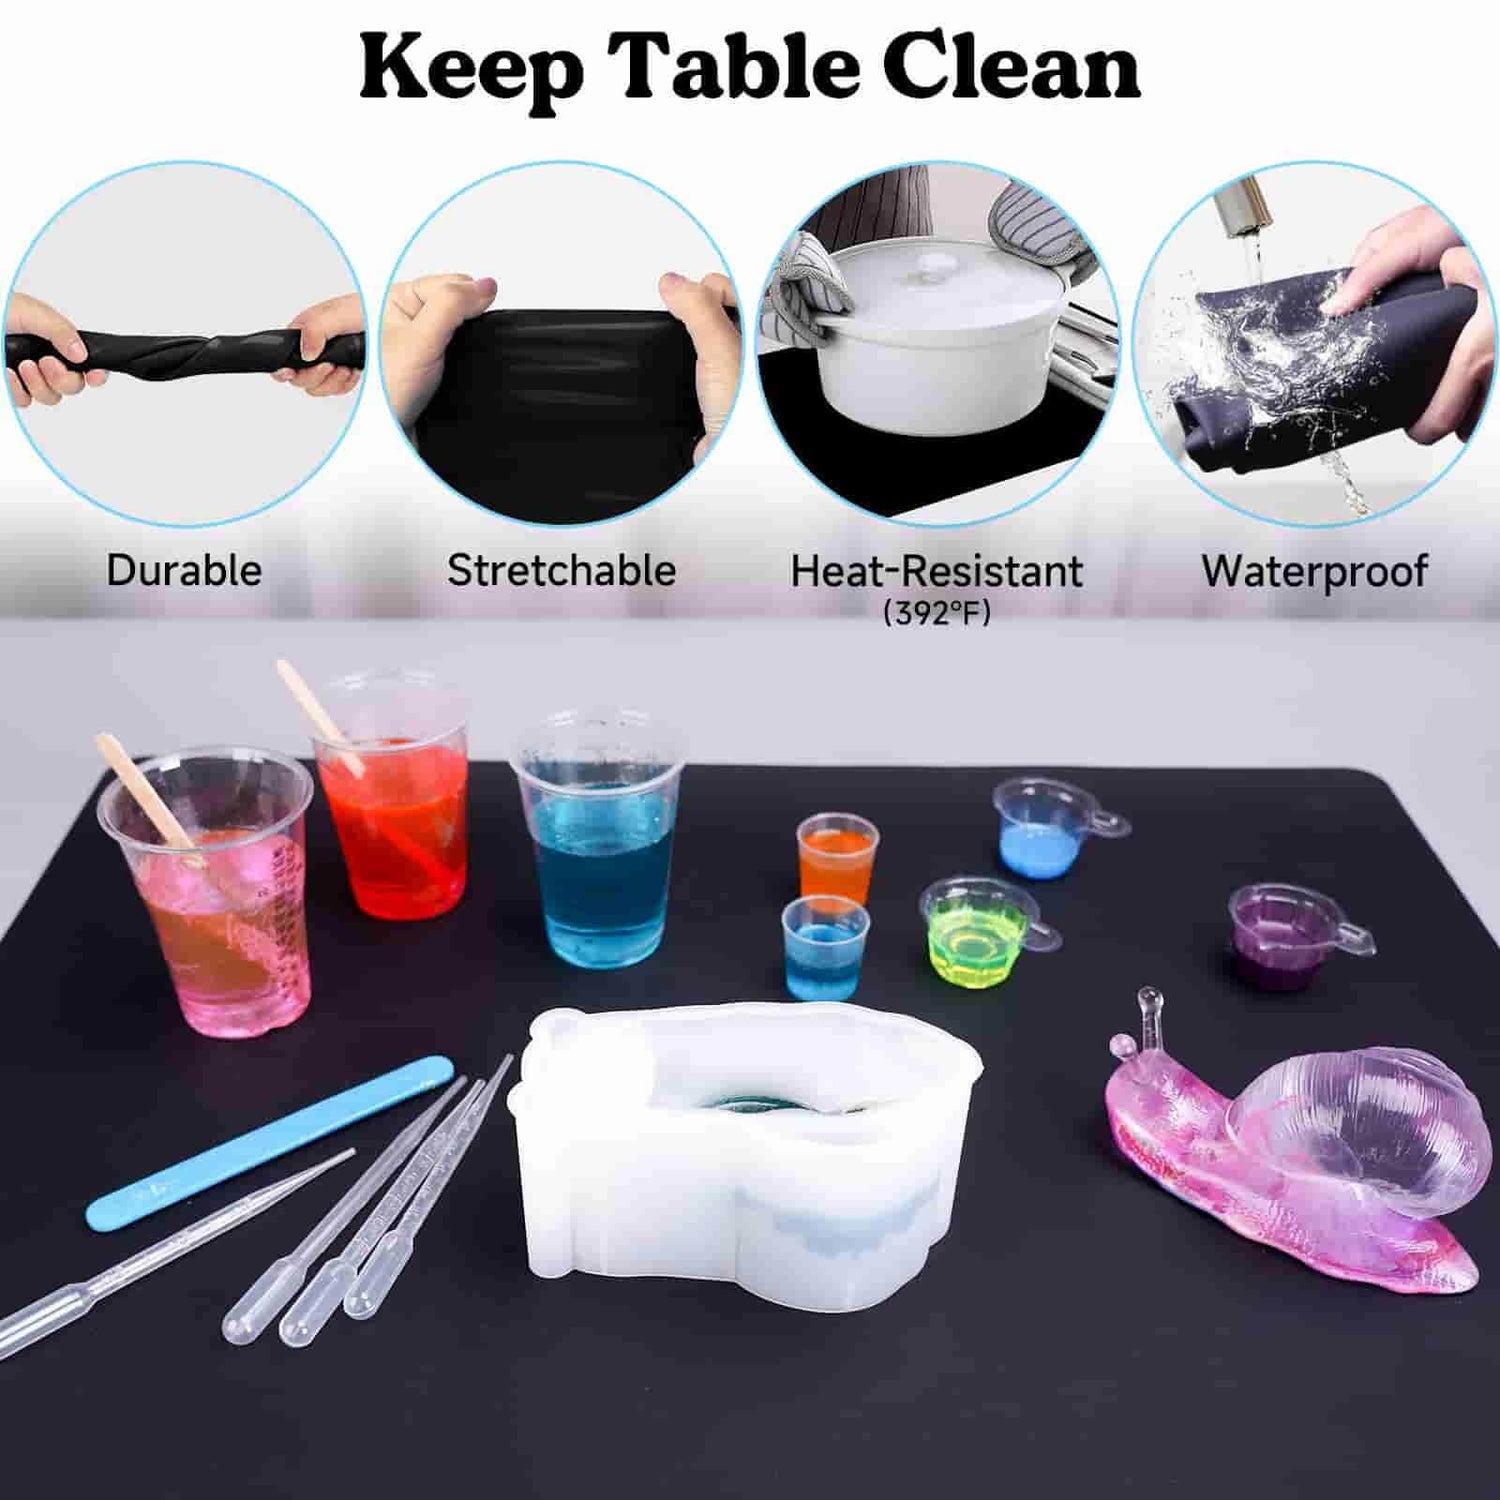 Adjustable Resin Leveling Table with Silicone Mat - 16''x 12